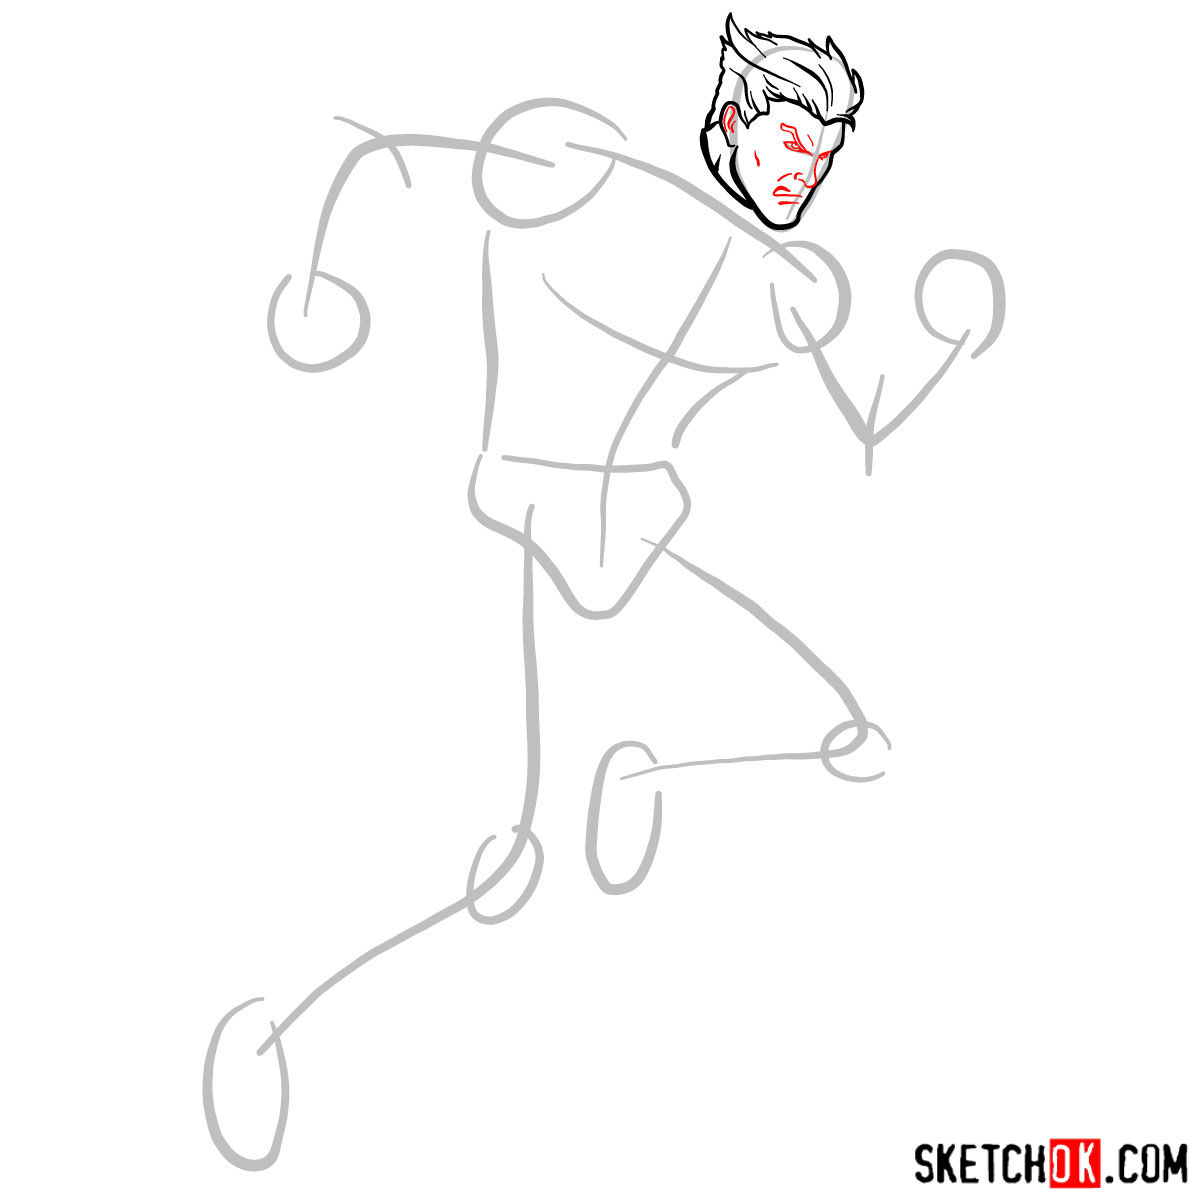 How to draw Quicksilver from Marvel Comics - step 04